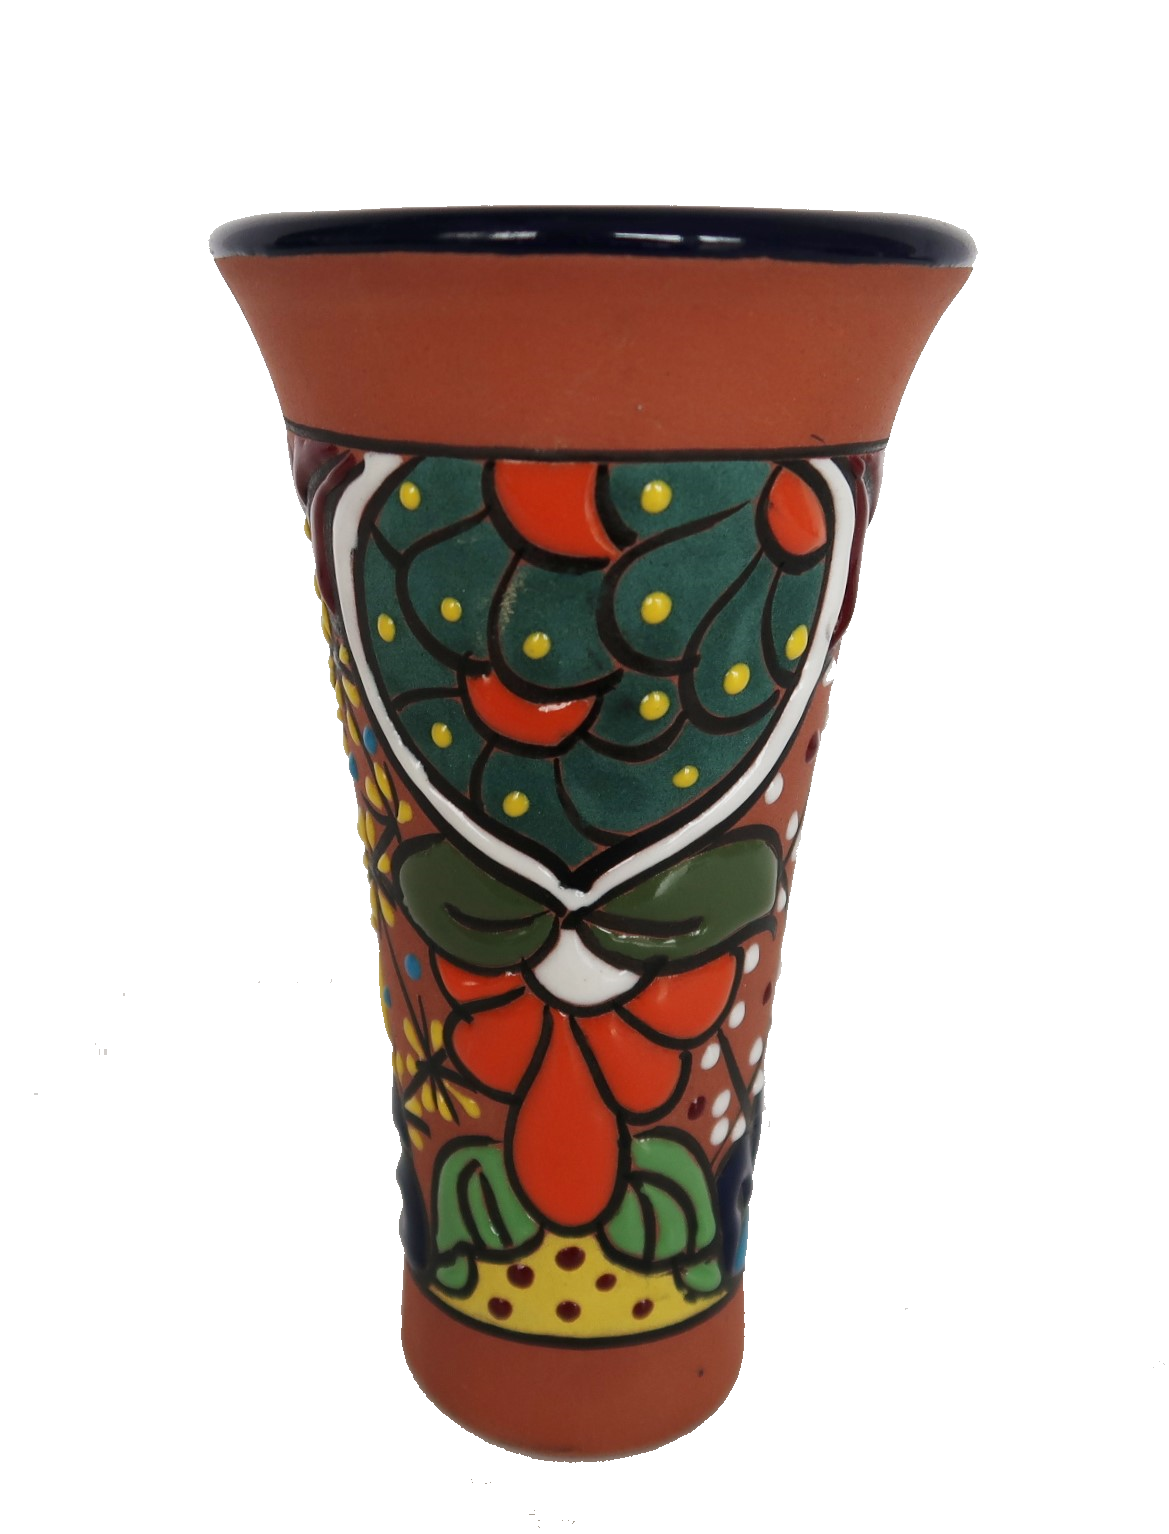 Primary image for Vintage red clay Talavera style Mexican pottery vase green orange flower pattern